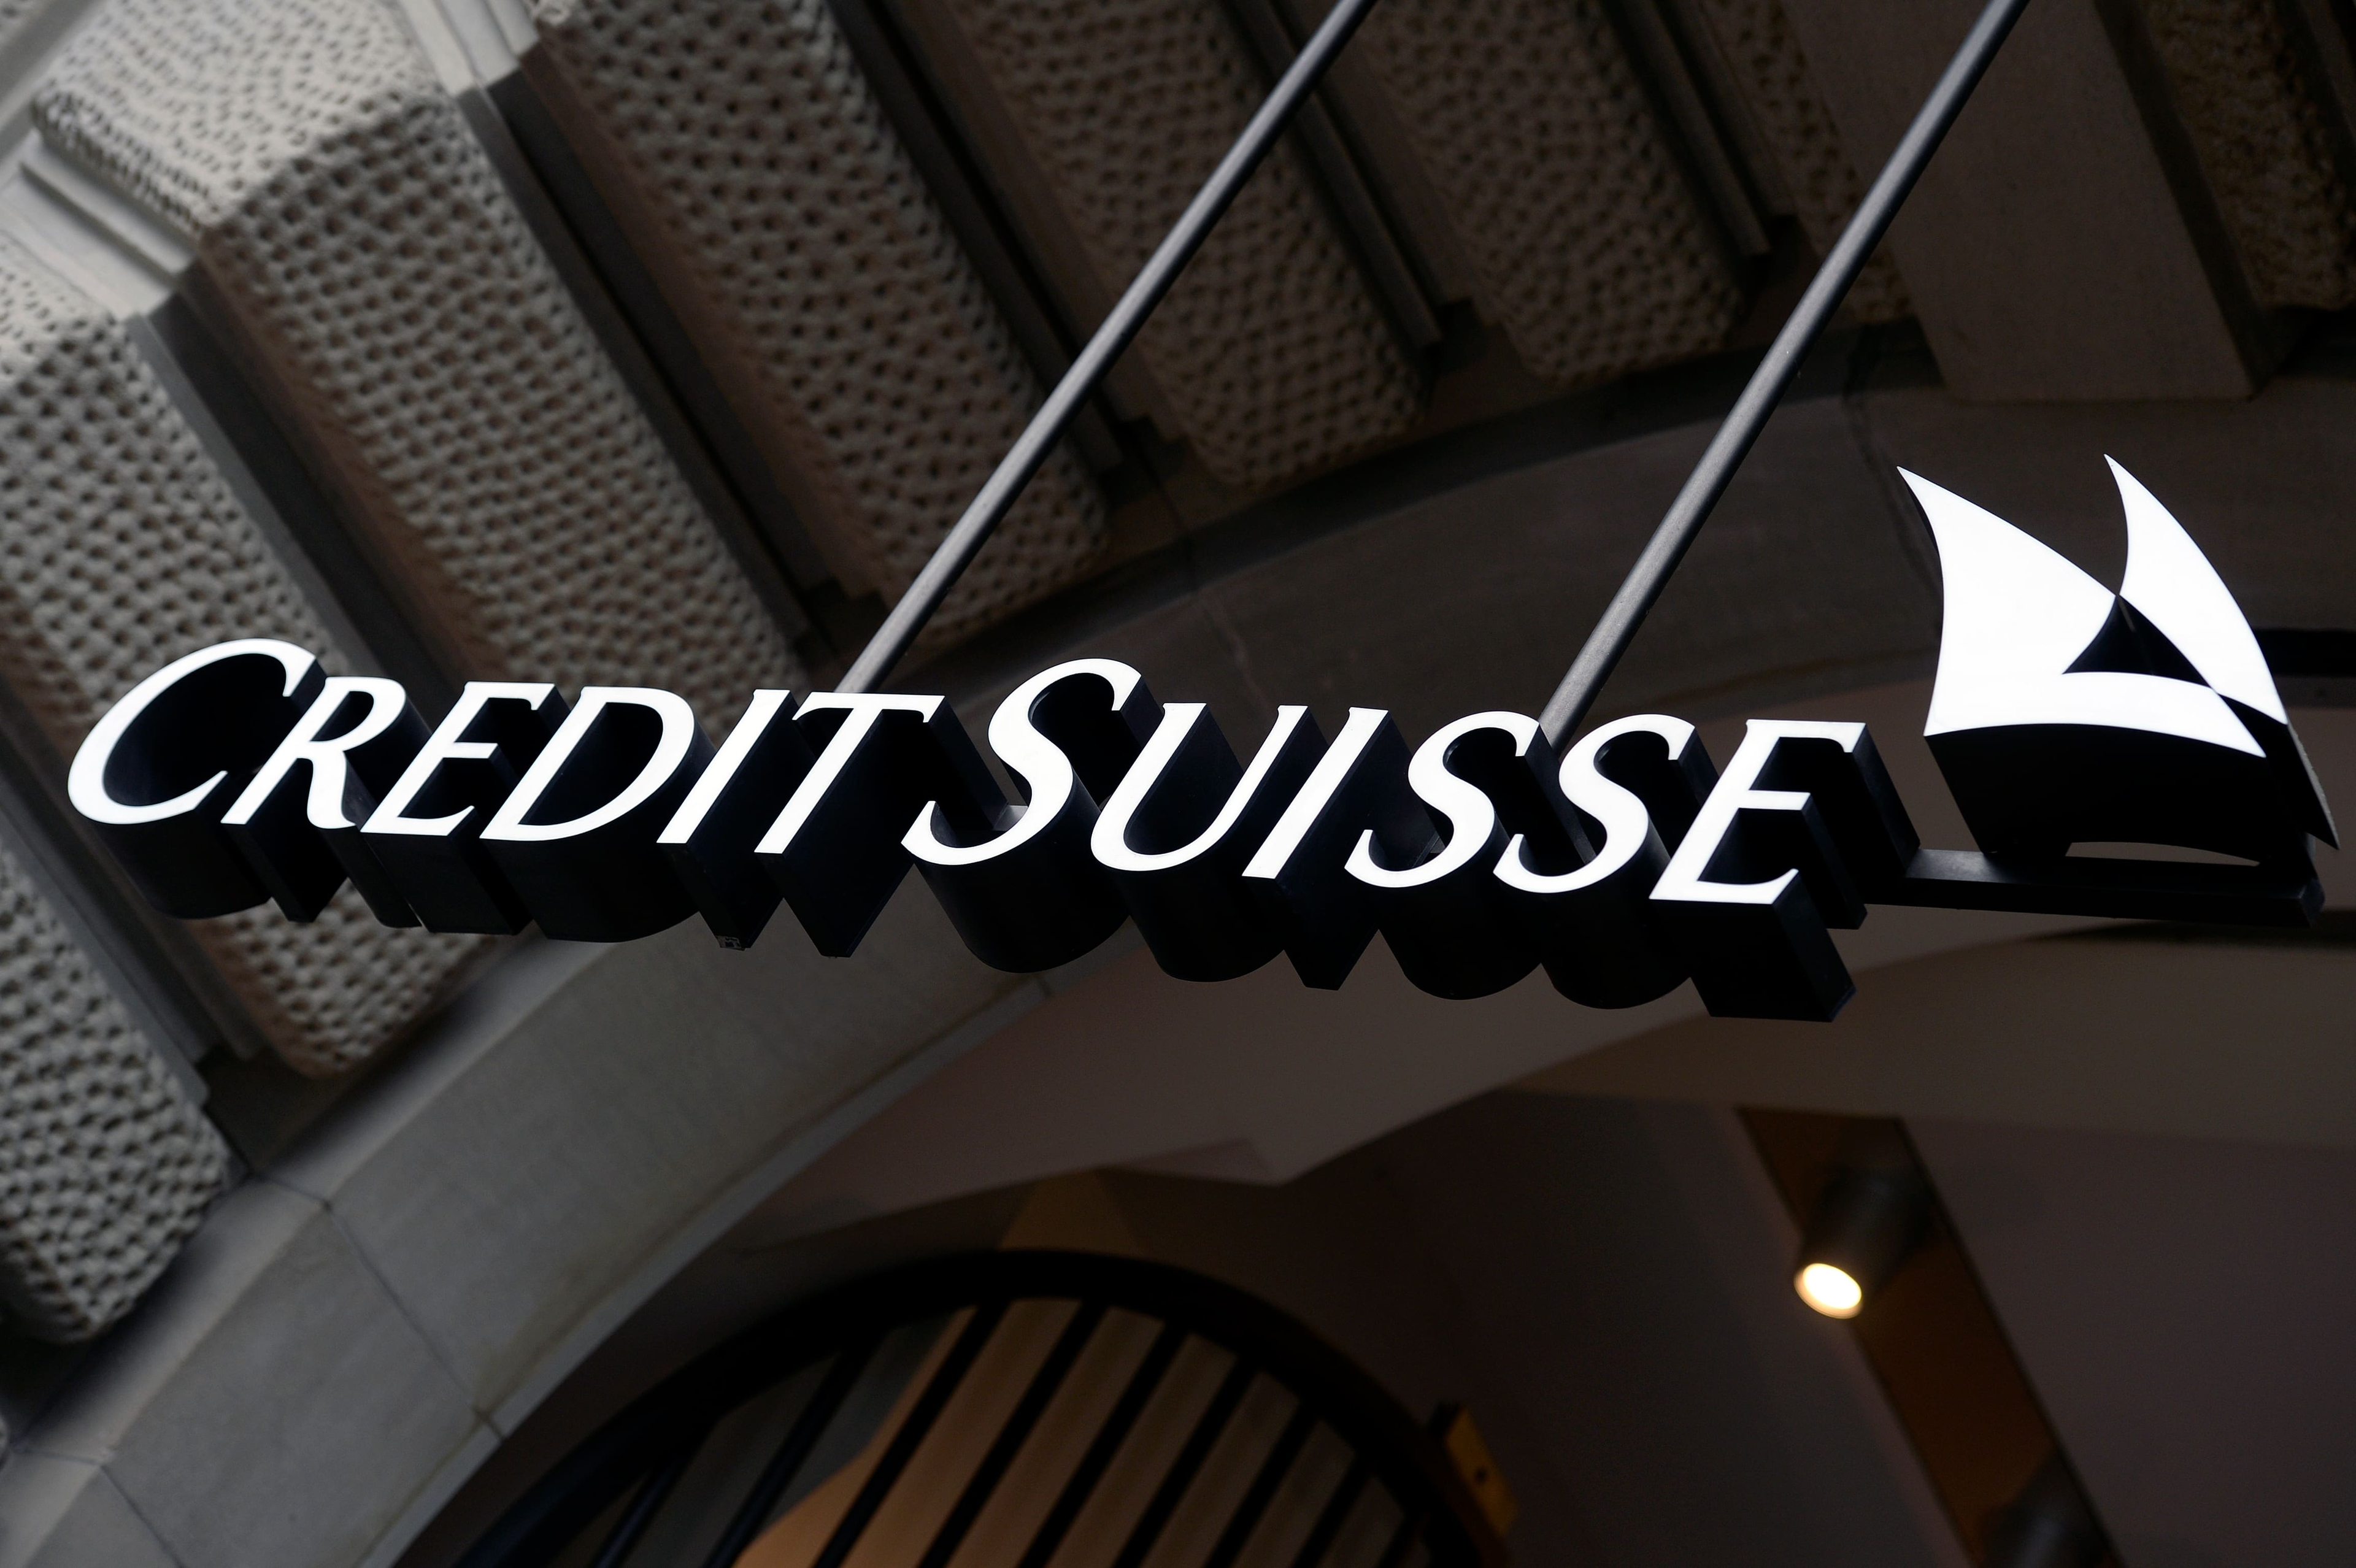 Credit Suisse, one of the world's largest financial services firms, has lowered its India position to ‘underweight’